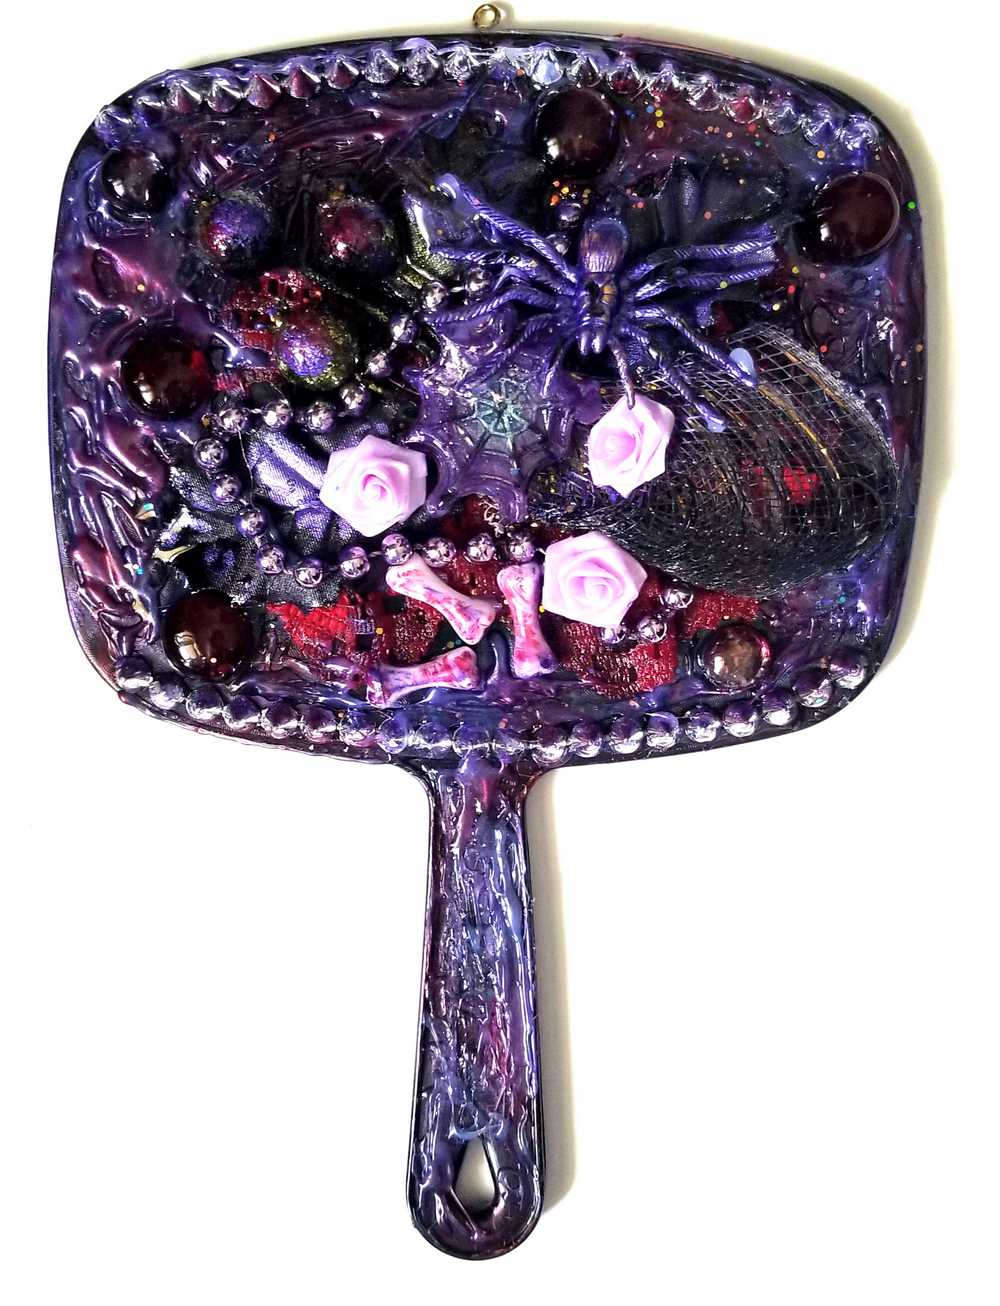 Black Hand Held Mirror with Bones, Roses, a Purple Spider and Her Web